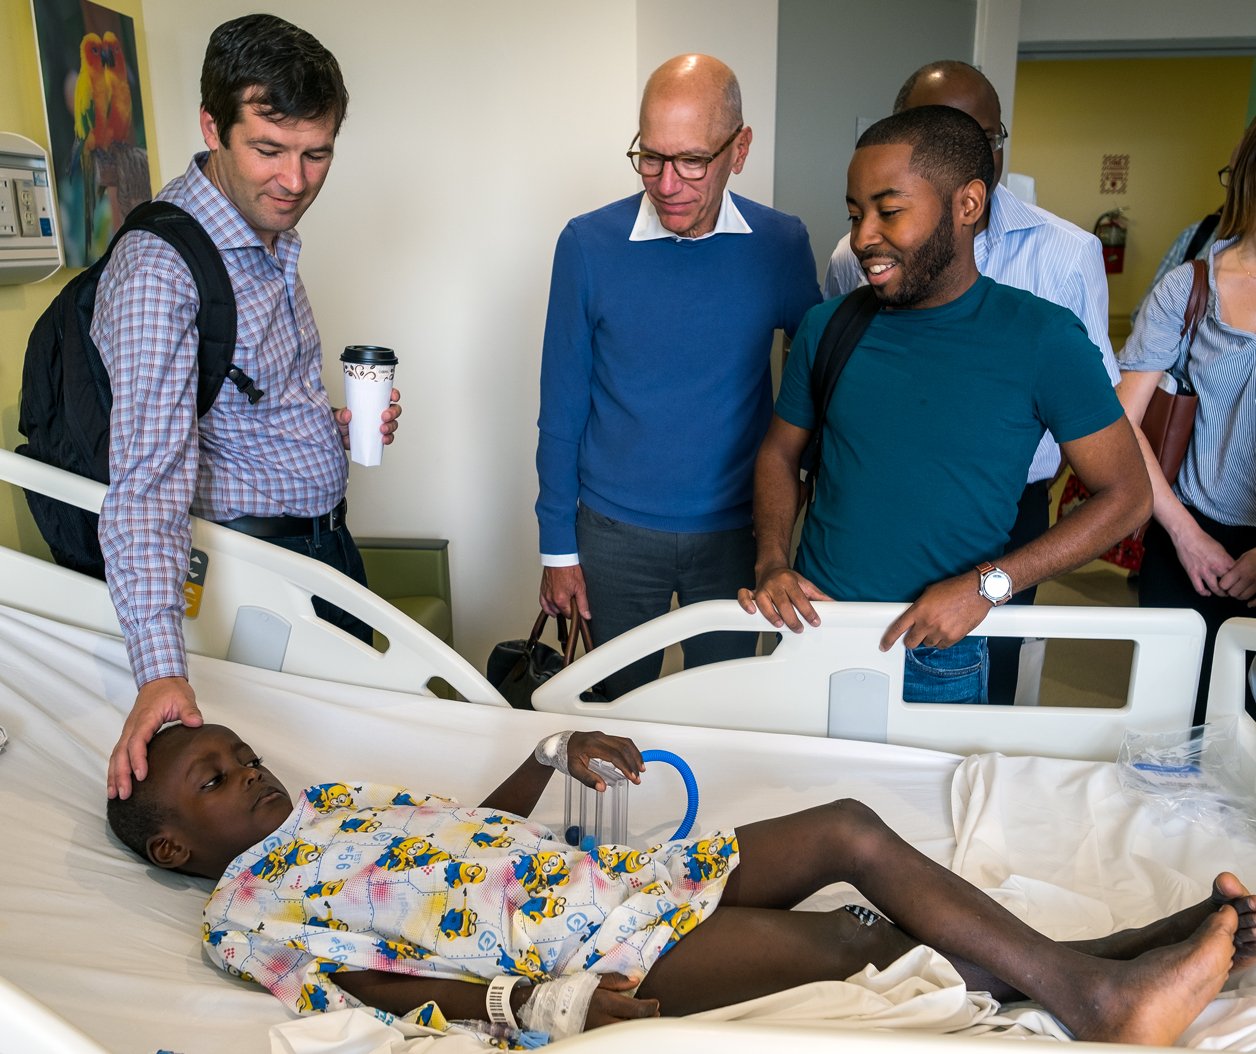 Before his surgery, Woodmylens meets Dr. Adams and team members from the Mitral Foundation and Haiti Cardiac Alliance.